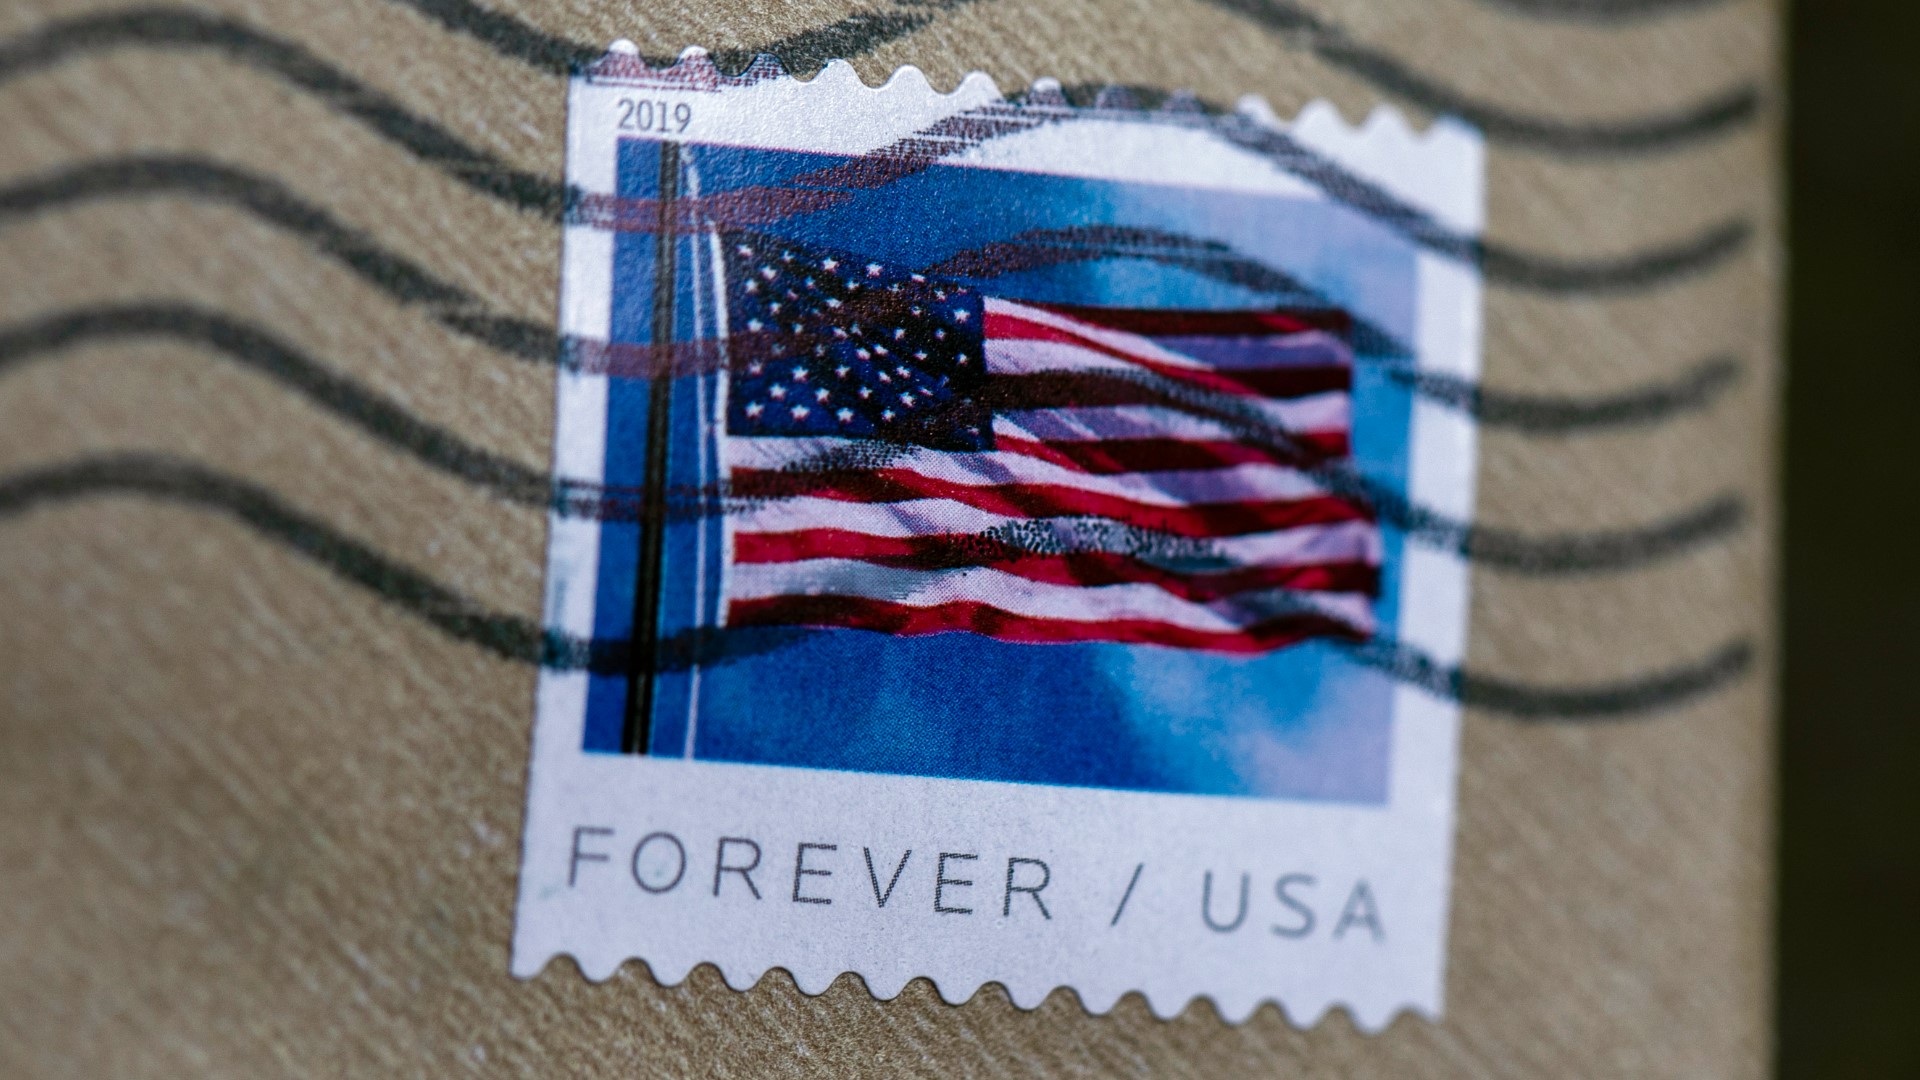 The U.S. Postal Service said it needs to adjust prices to achieve its "Delivering for America" 10-year plan.